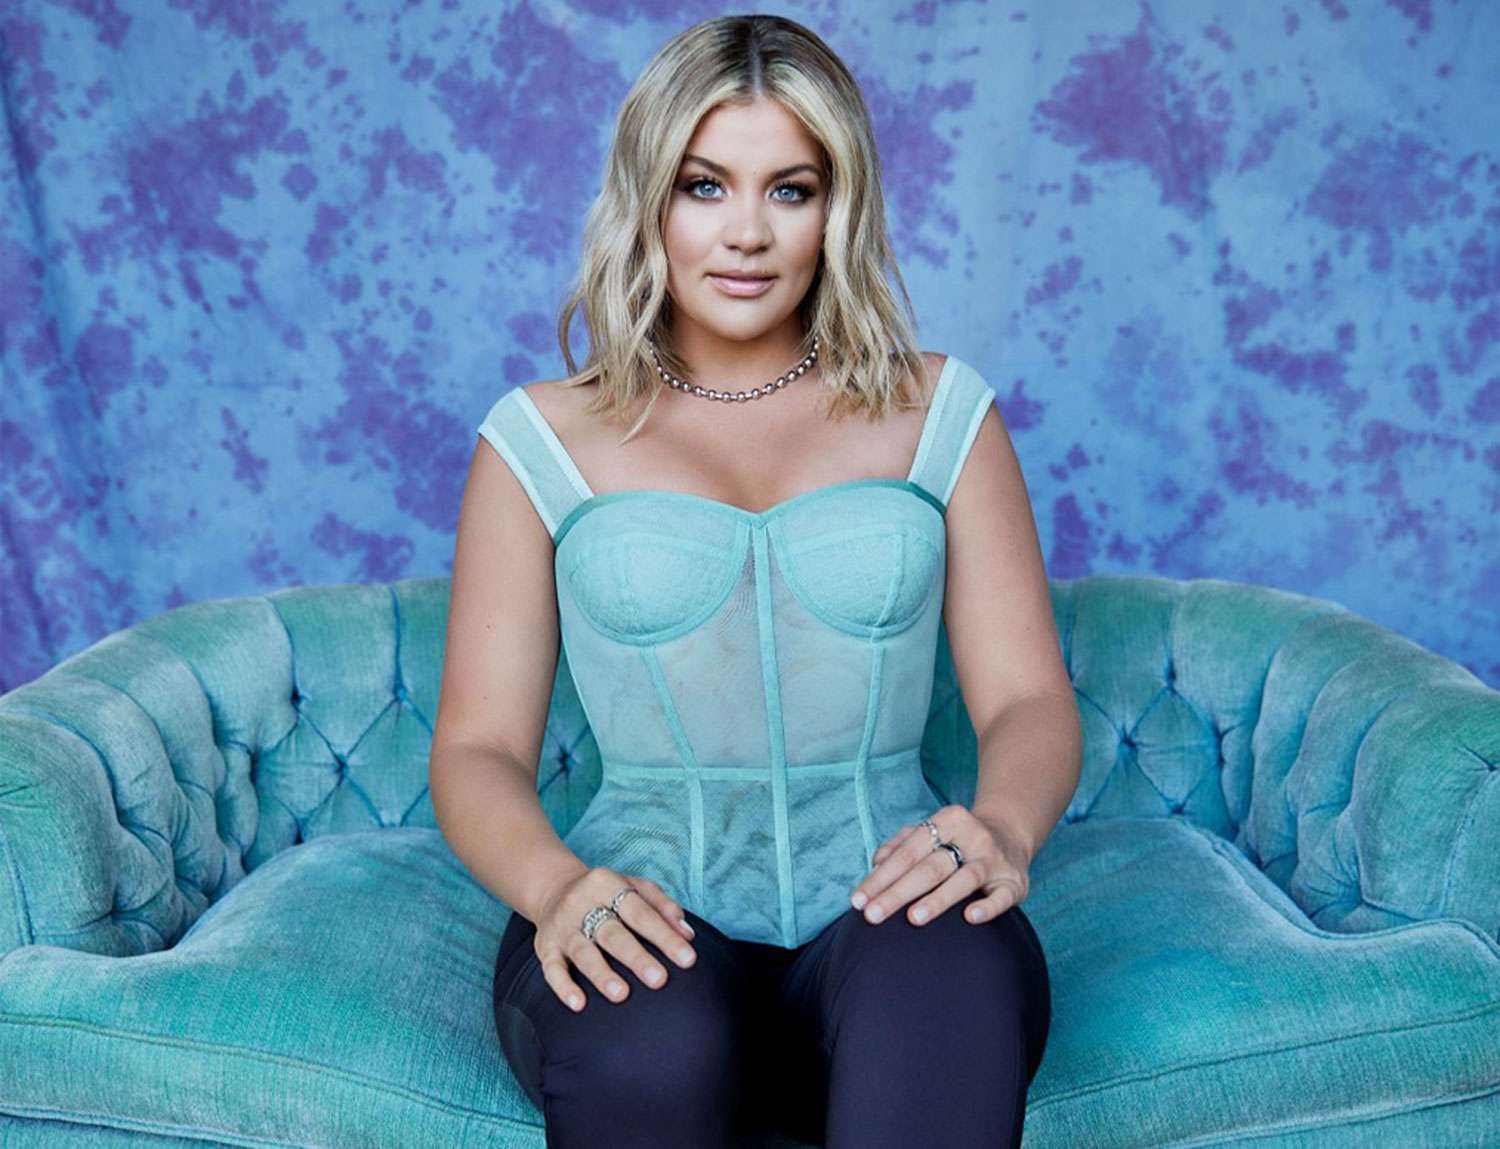 Lauren Alaina Says Her New Album Is the Result of an 'Active Decision to Focus on the Good Things'